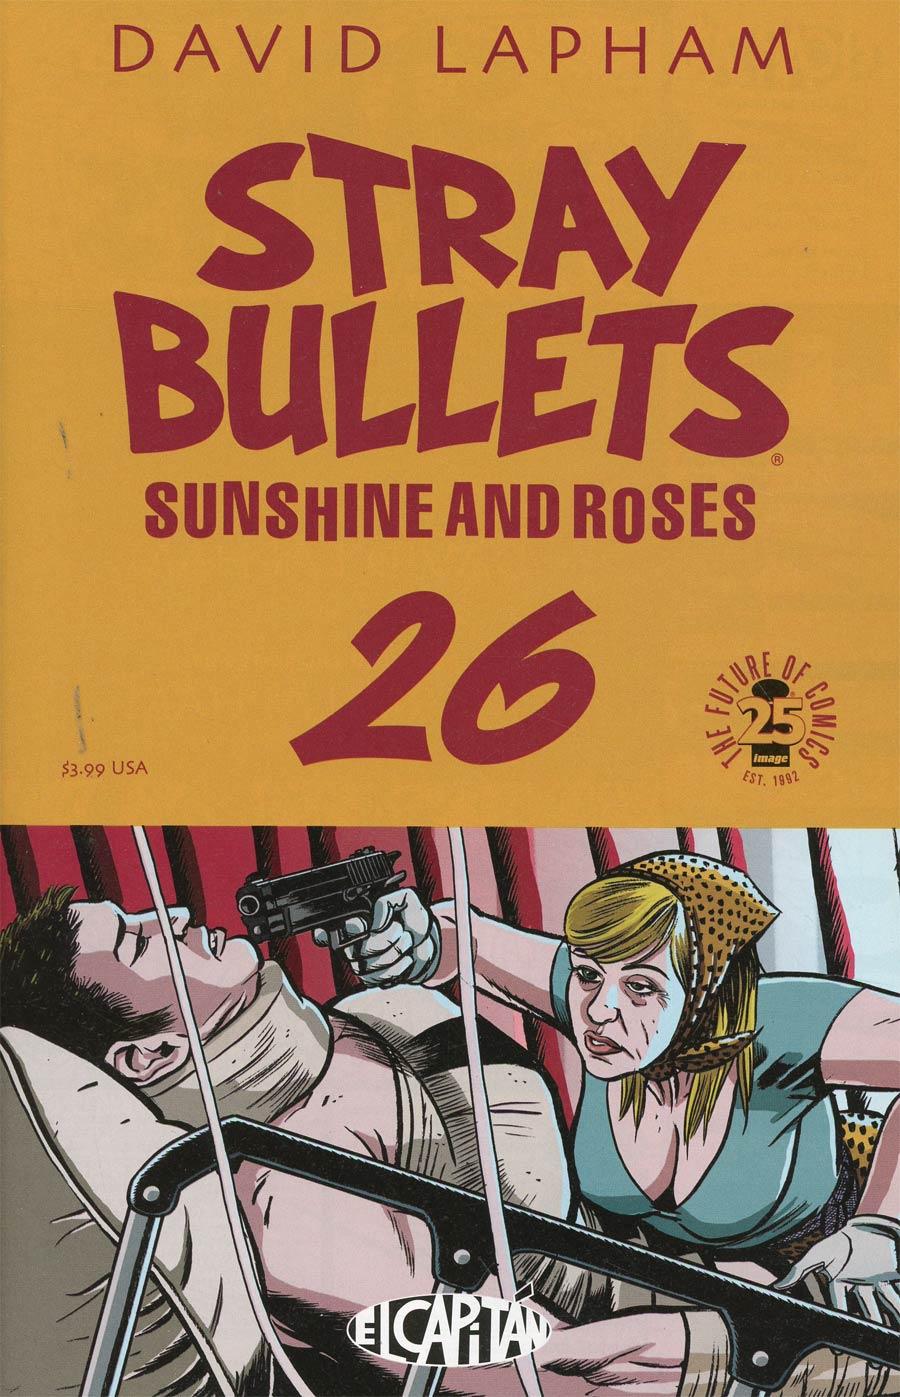 Stray Bullets Sunshine And Roses Vol. 1 #26